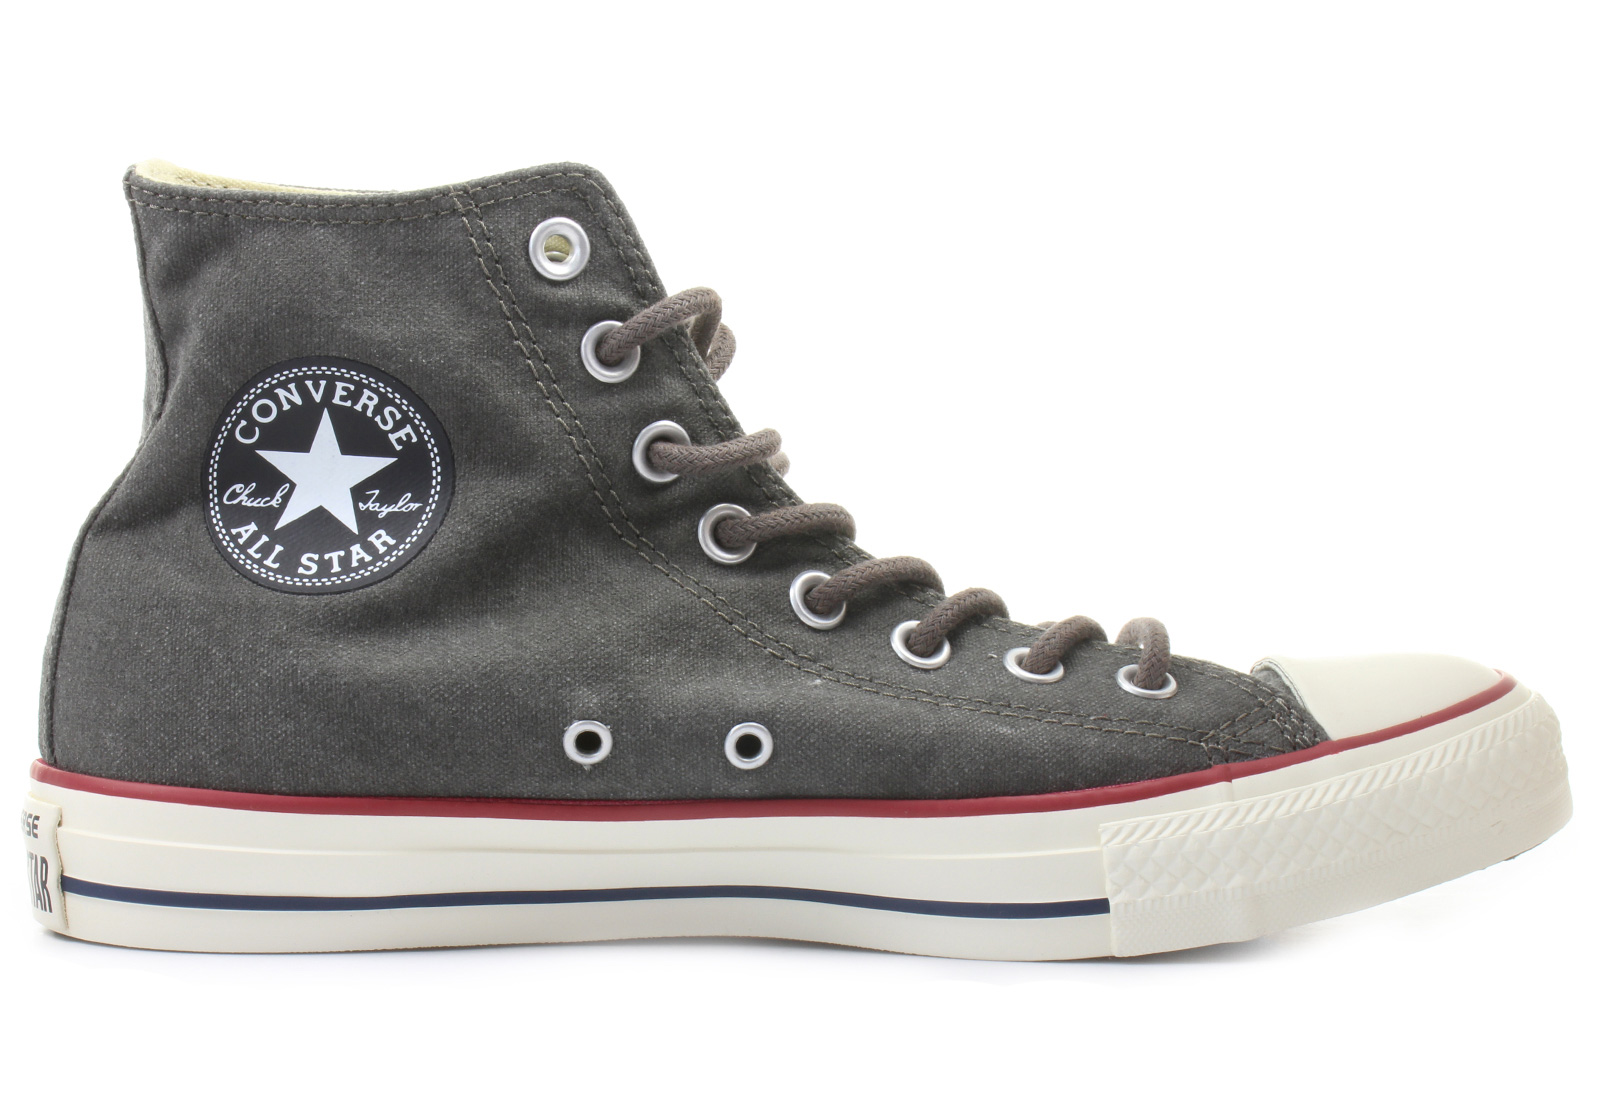 Converse Sneakers - Chuck Taylor All Star Distressed Hi - 144633C ...